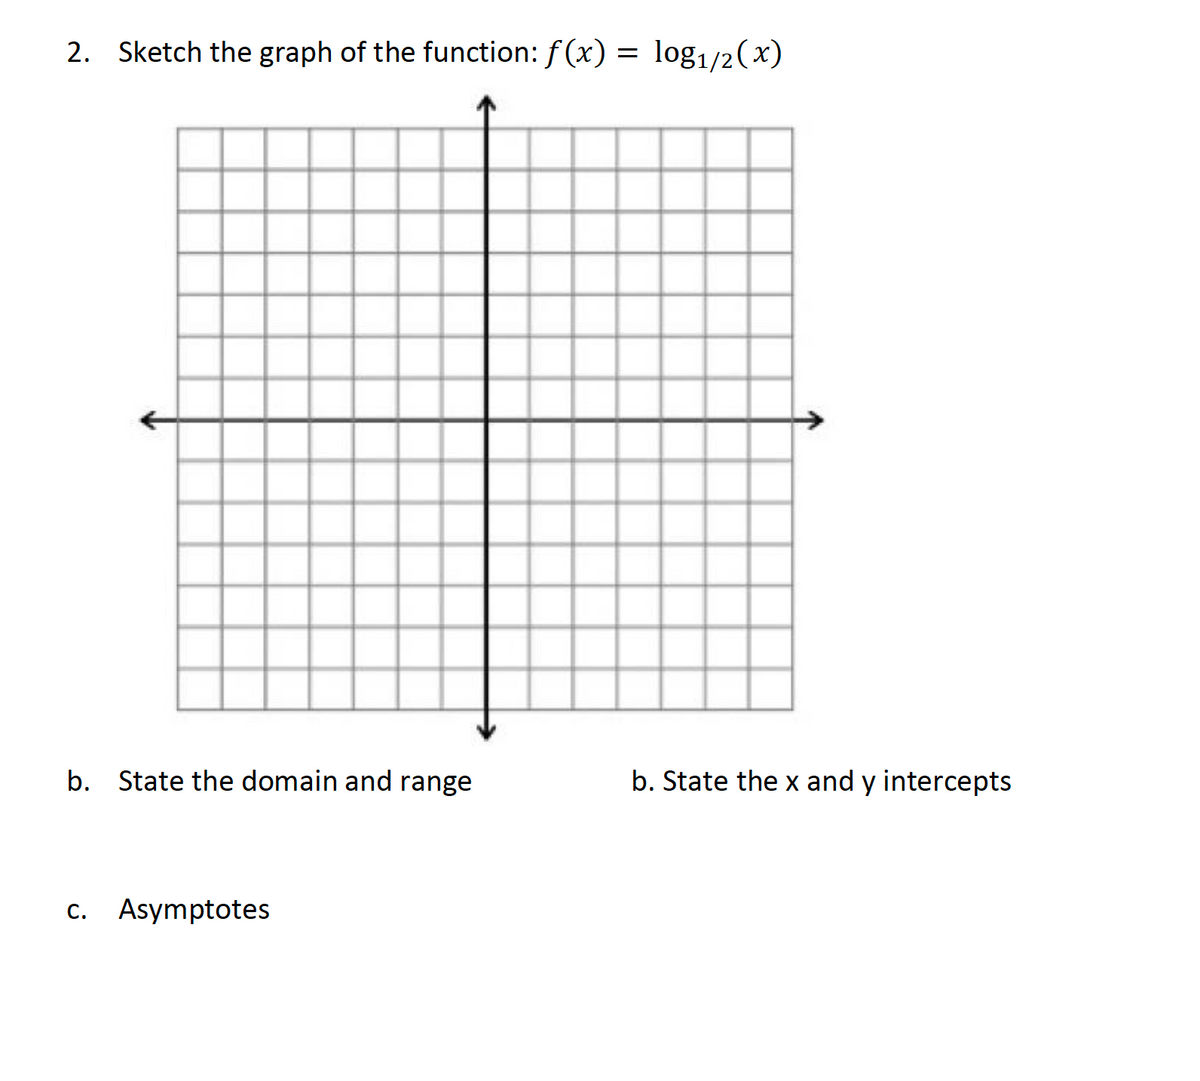 2. Sketch the graph of the function: f(x) = log1/2(x)
b. State the domain and range
b. State the x and y intercepts
c. Asymptotes
